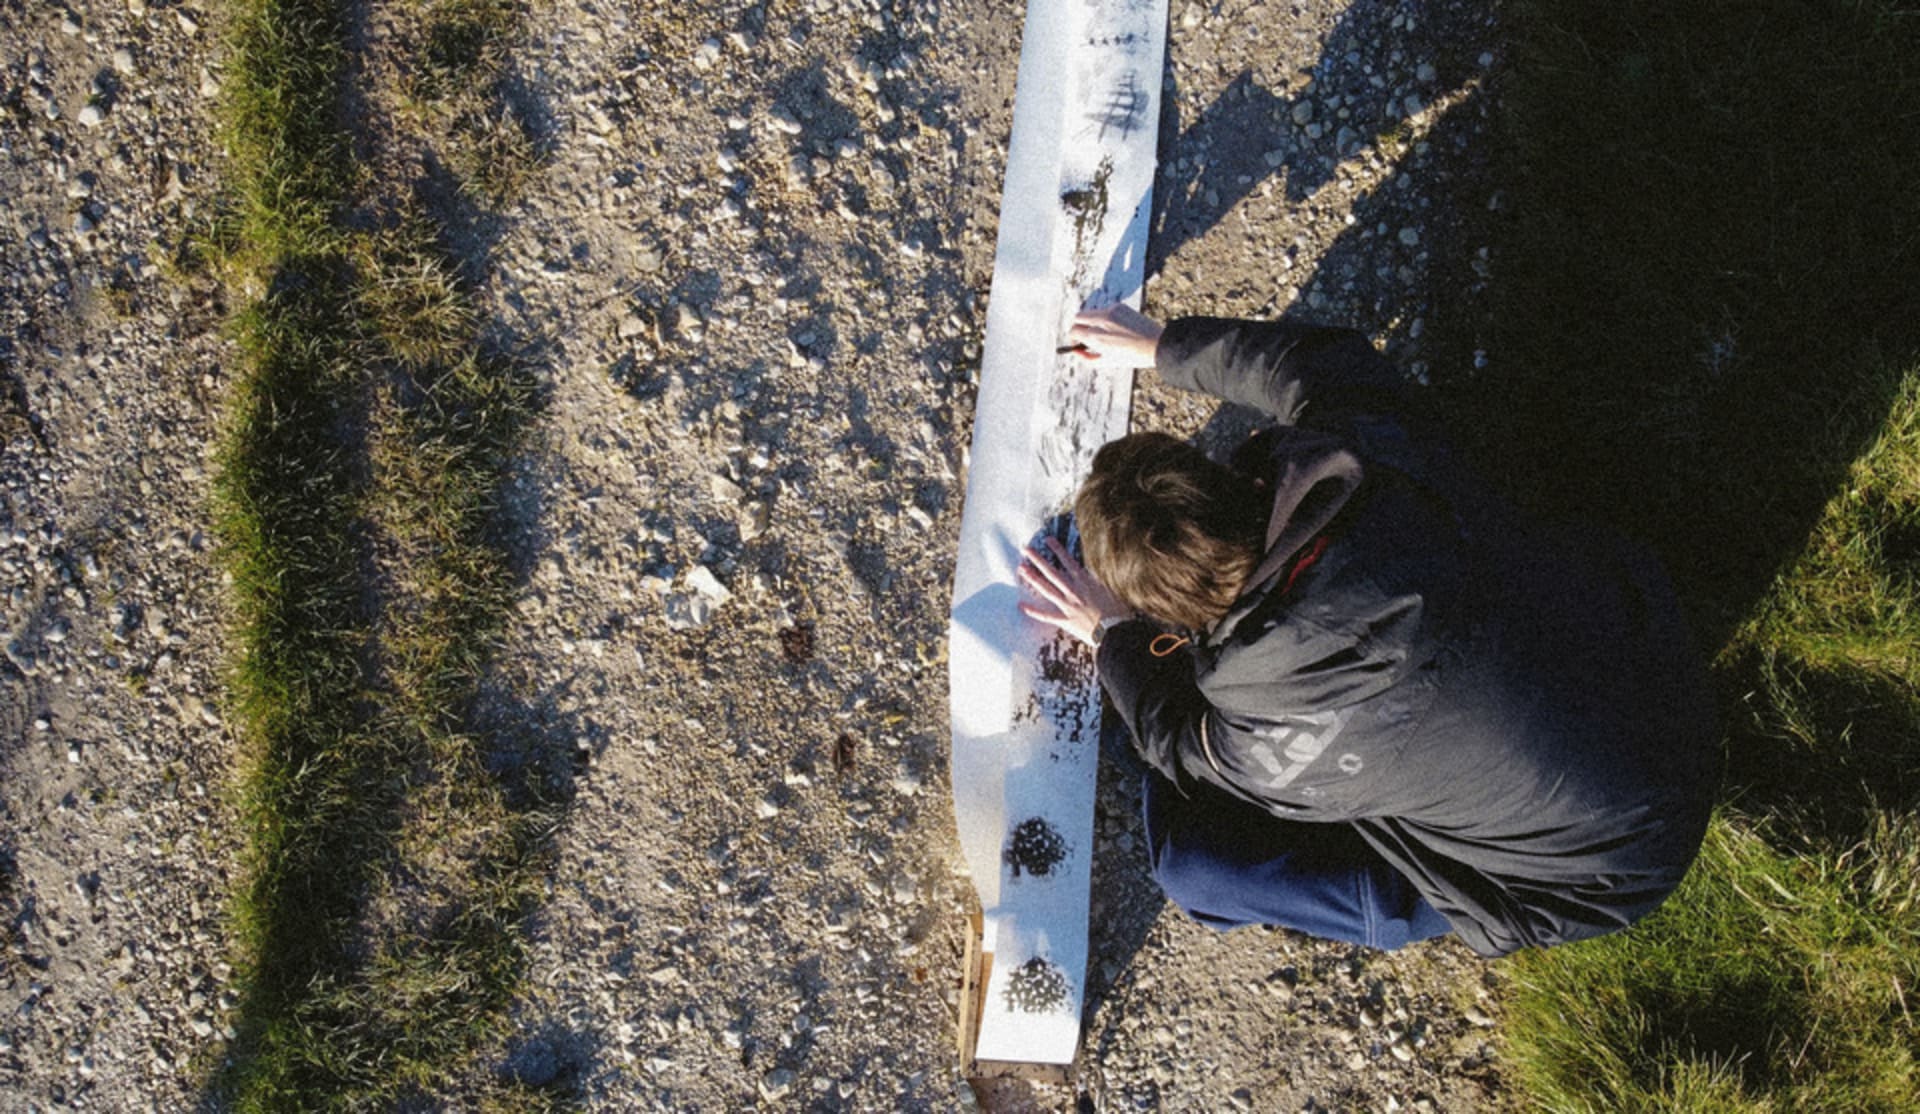 Picture is an arial photograph showing a long scroll of paper on a dirt track. A figure is crouched over the paper making marks.